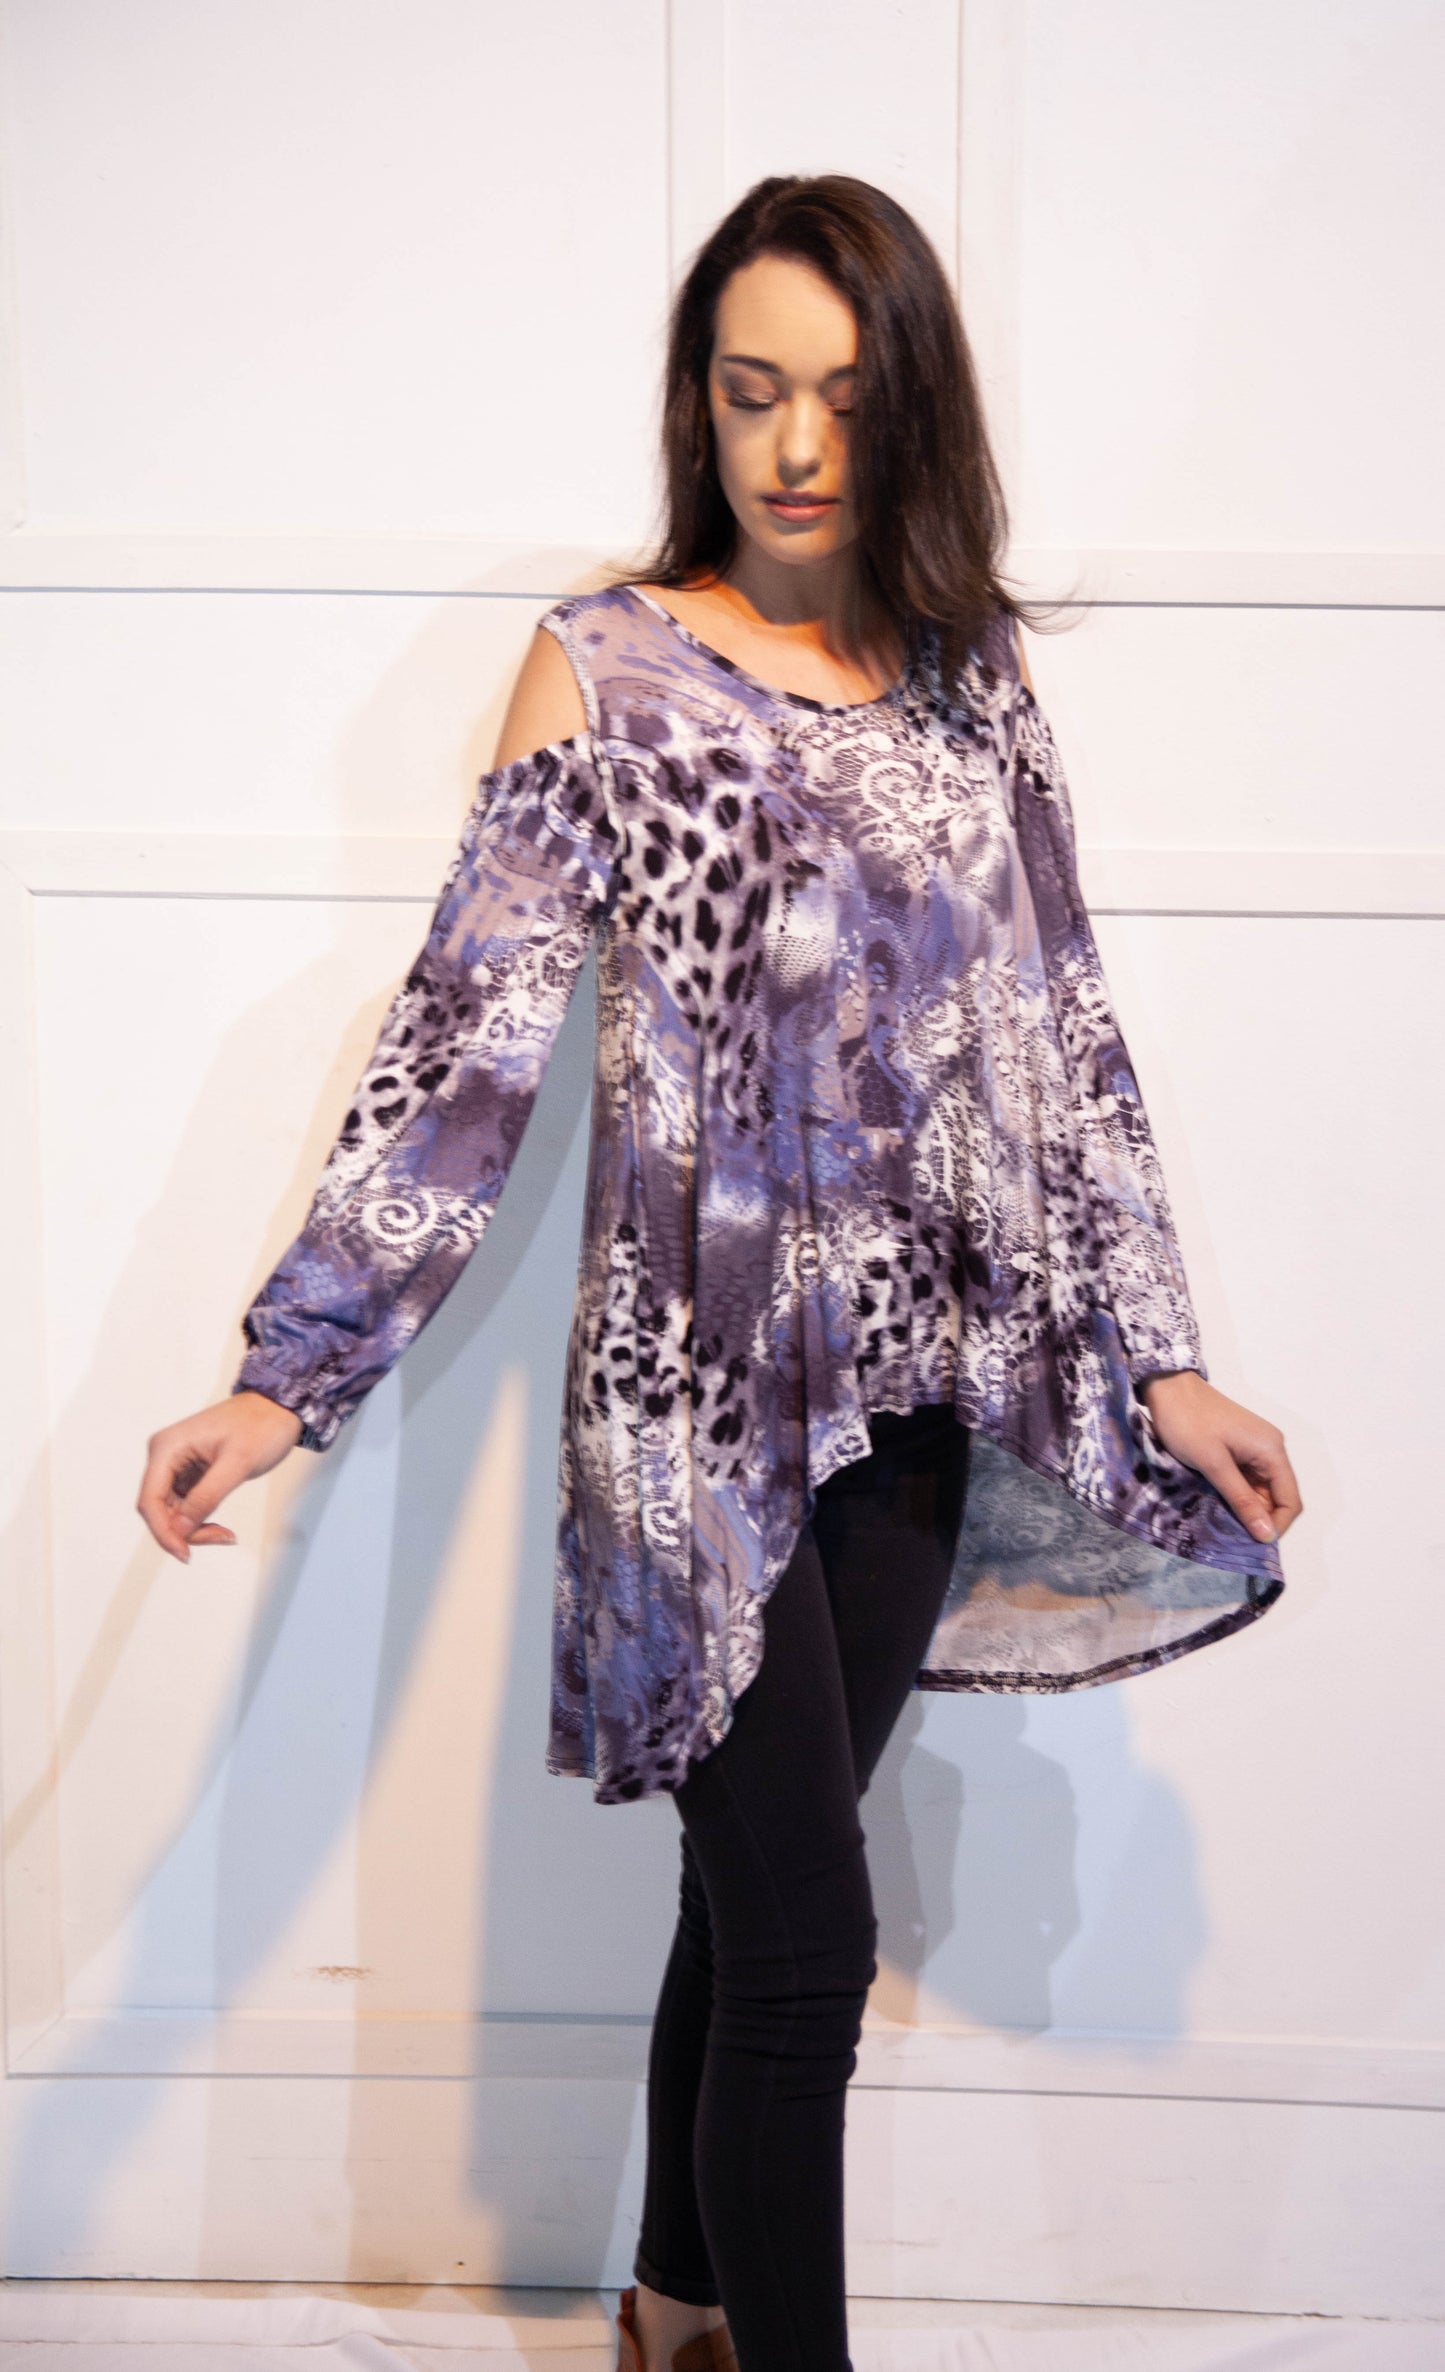 Open Shoulder Blouse with 3/4 Sleeves - Purple and White